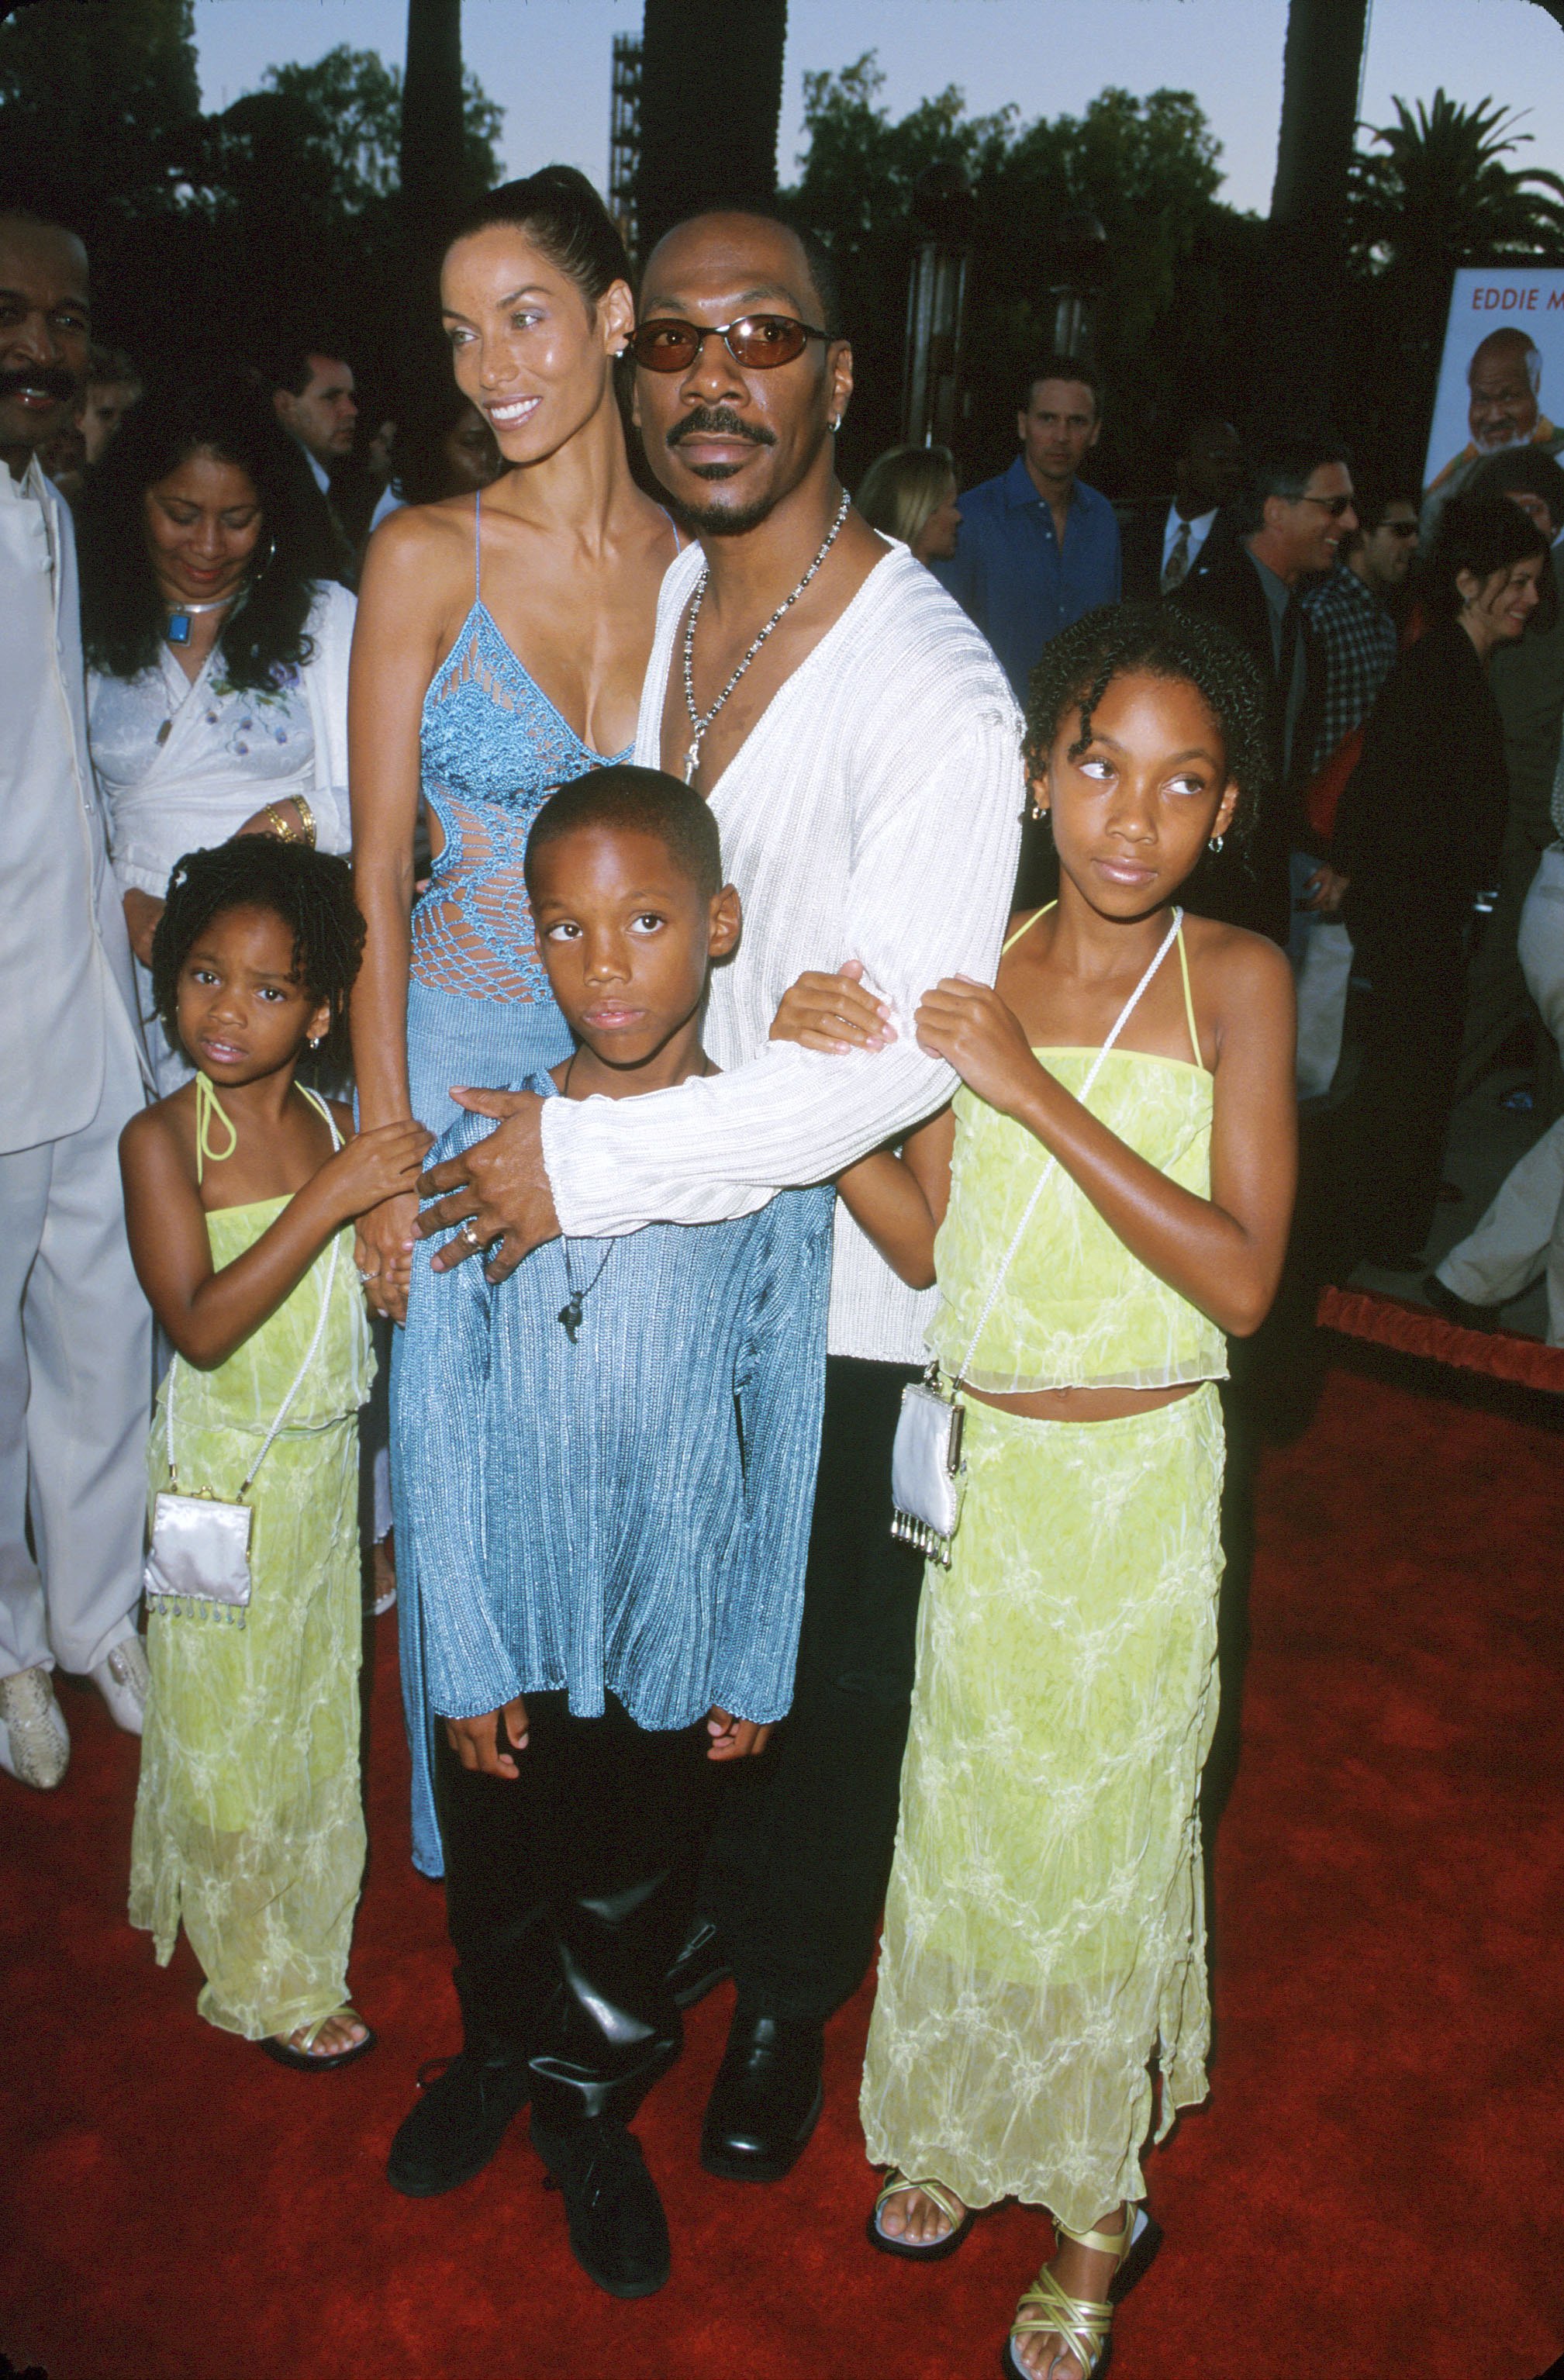 Eddie and Mitchell Murphy with their children during "Nutty Professor II - The Klumps" - Los Angeles premiere in Universal City, California, on July 24, 2000. | Source: Getty Images